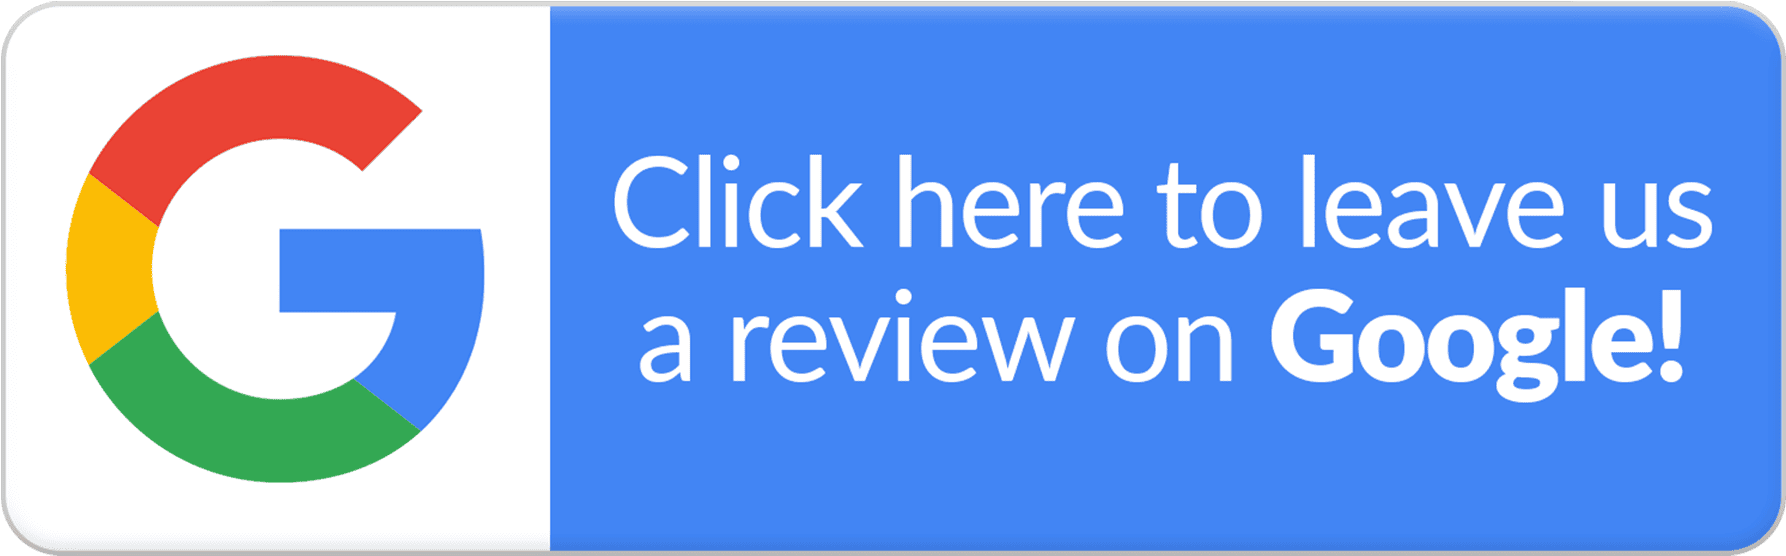 Google Reviews - Pool Servicing by Pool Equipment Installers of Houston 